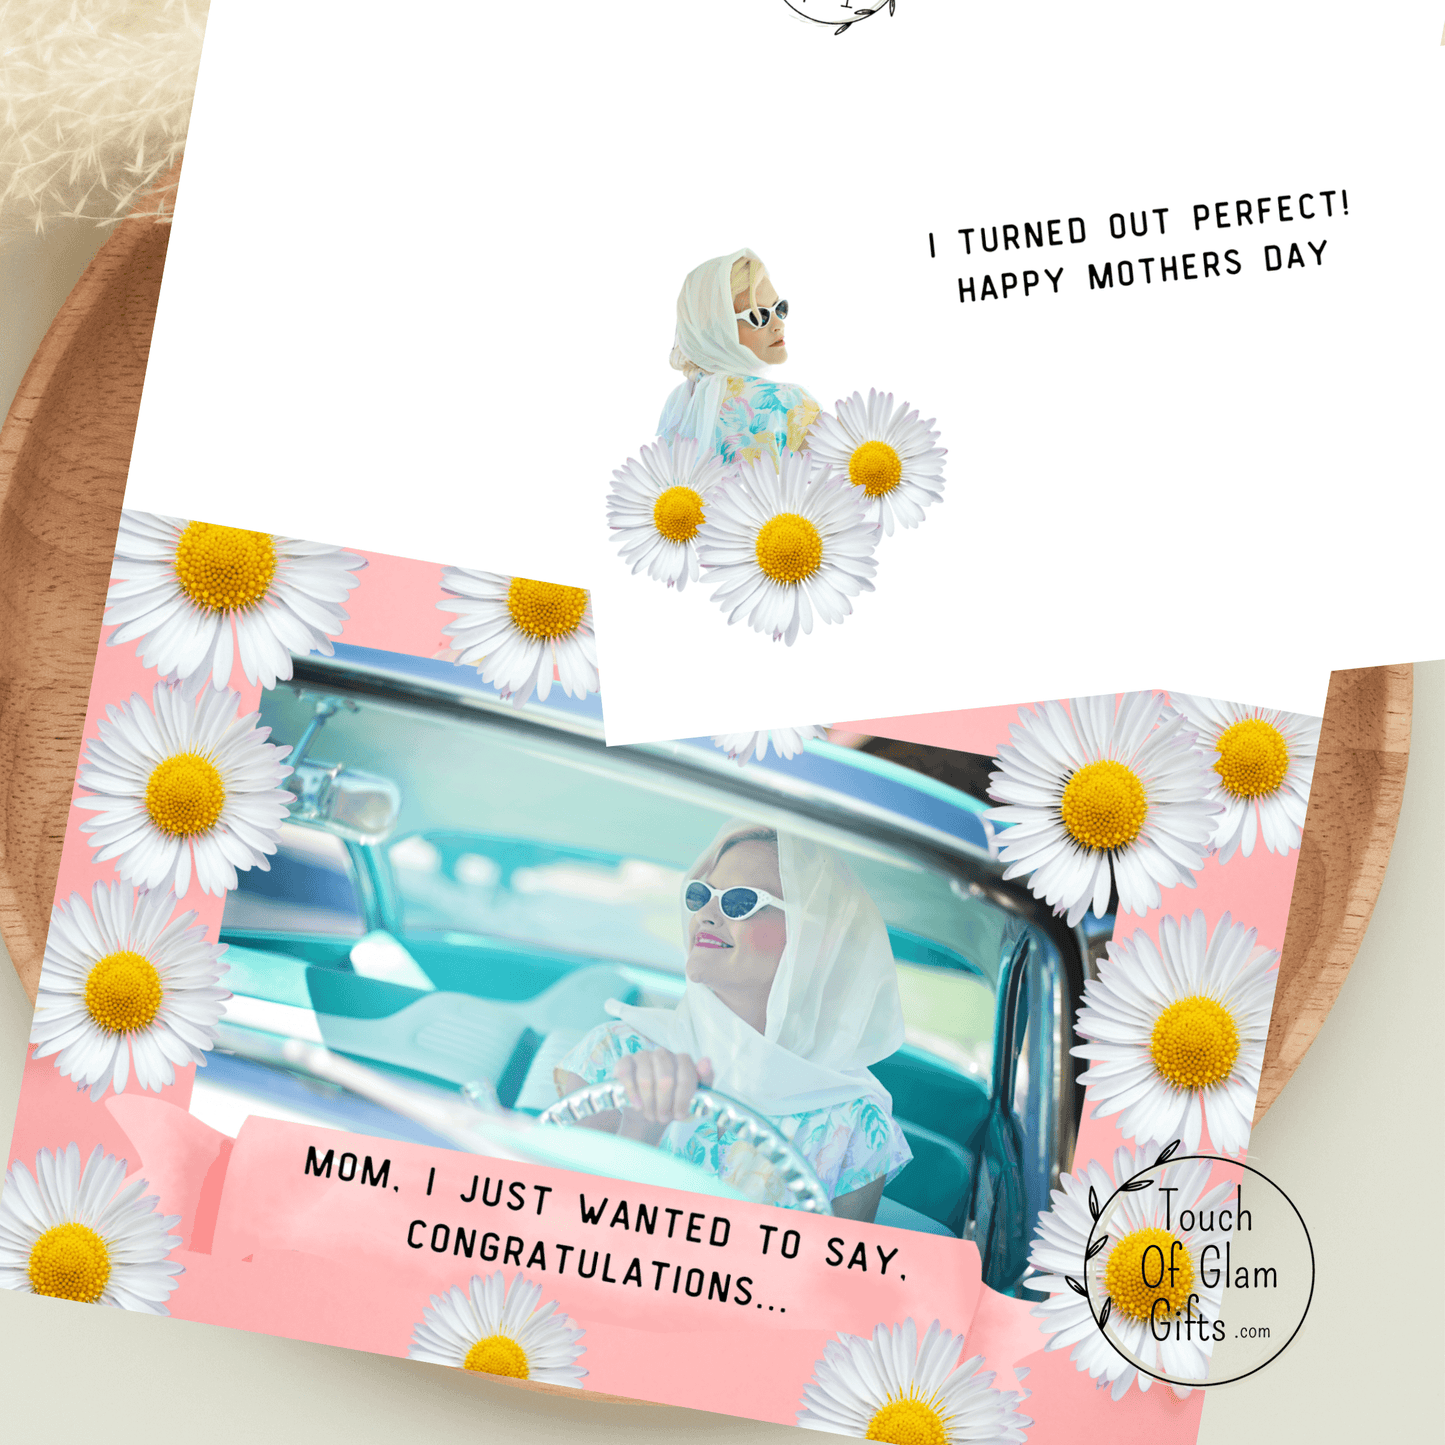 Printable mothers day card with a vintage feel and woman driving a car